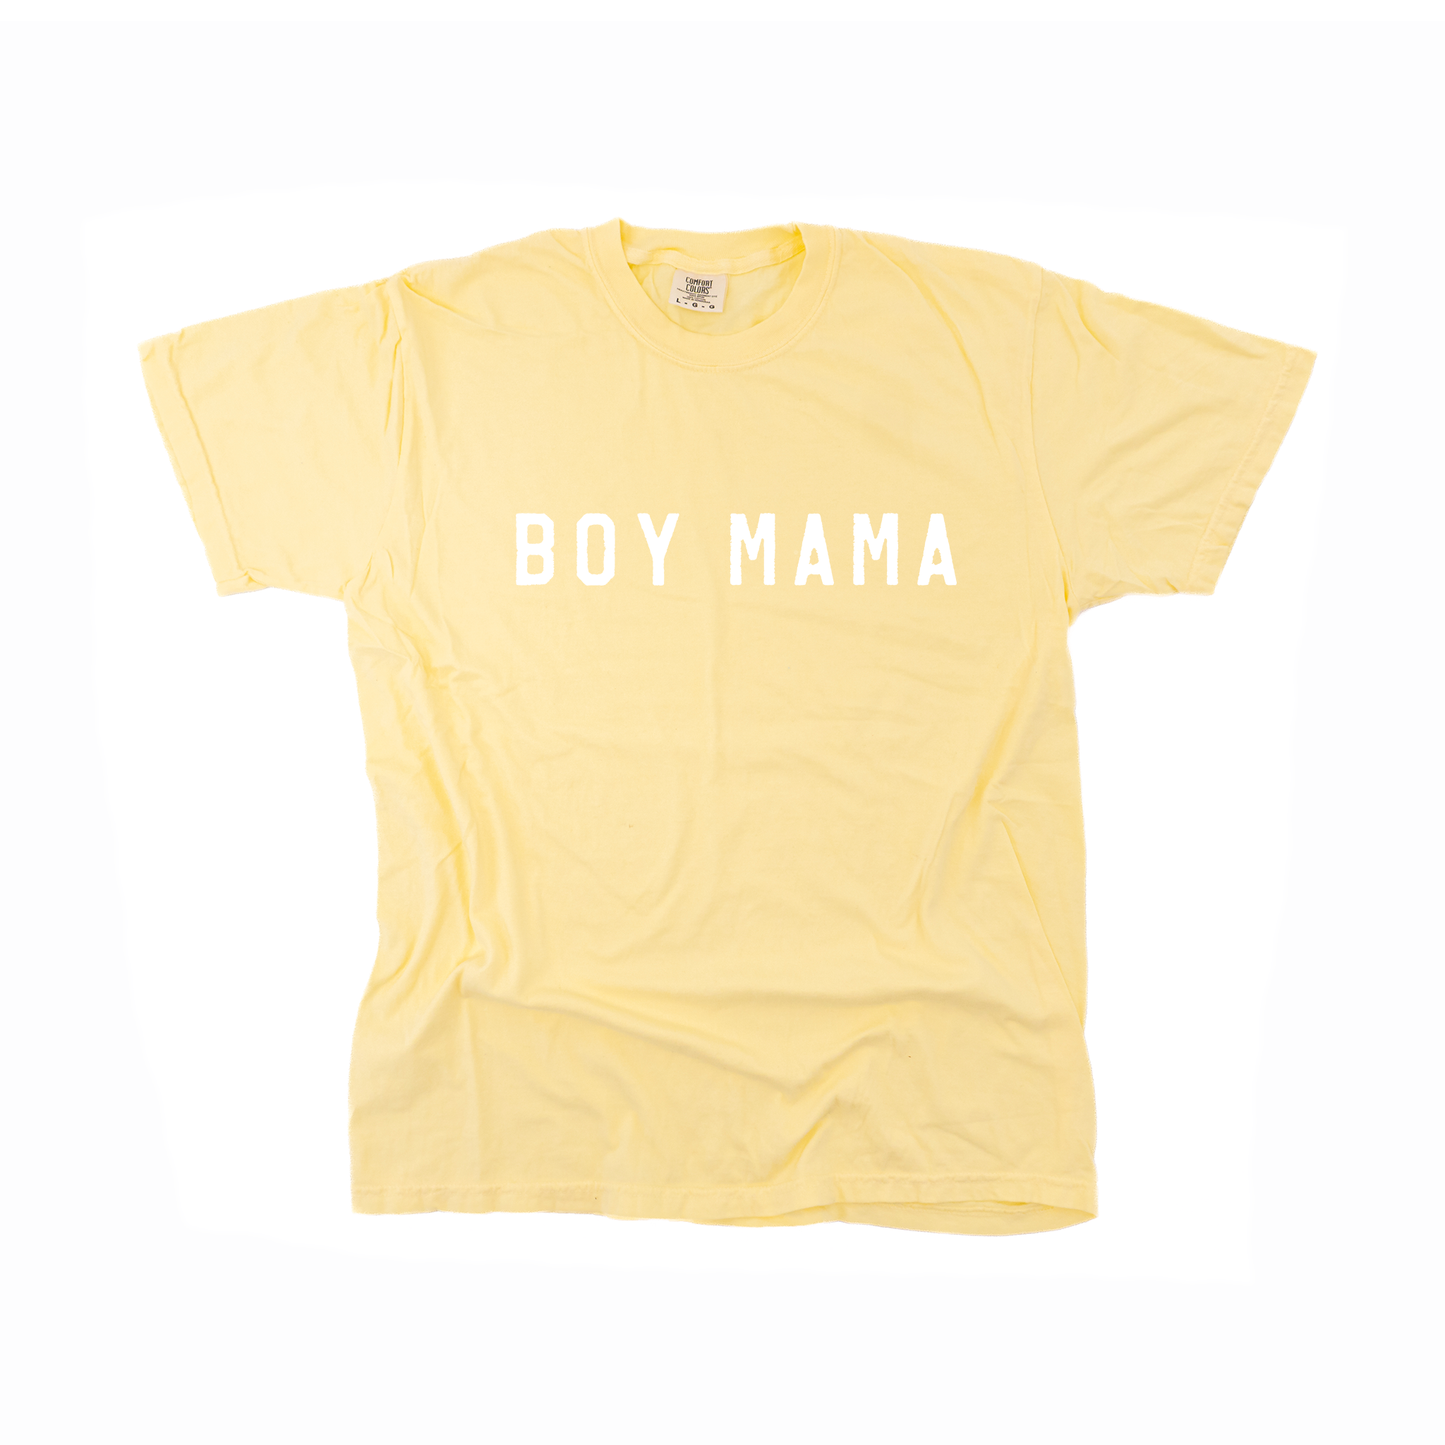 Boy Mama (Across Front, White) - Tee (Pale Yellow)